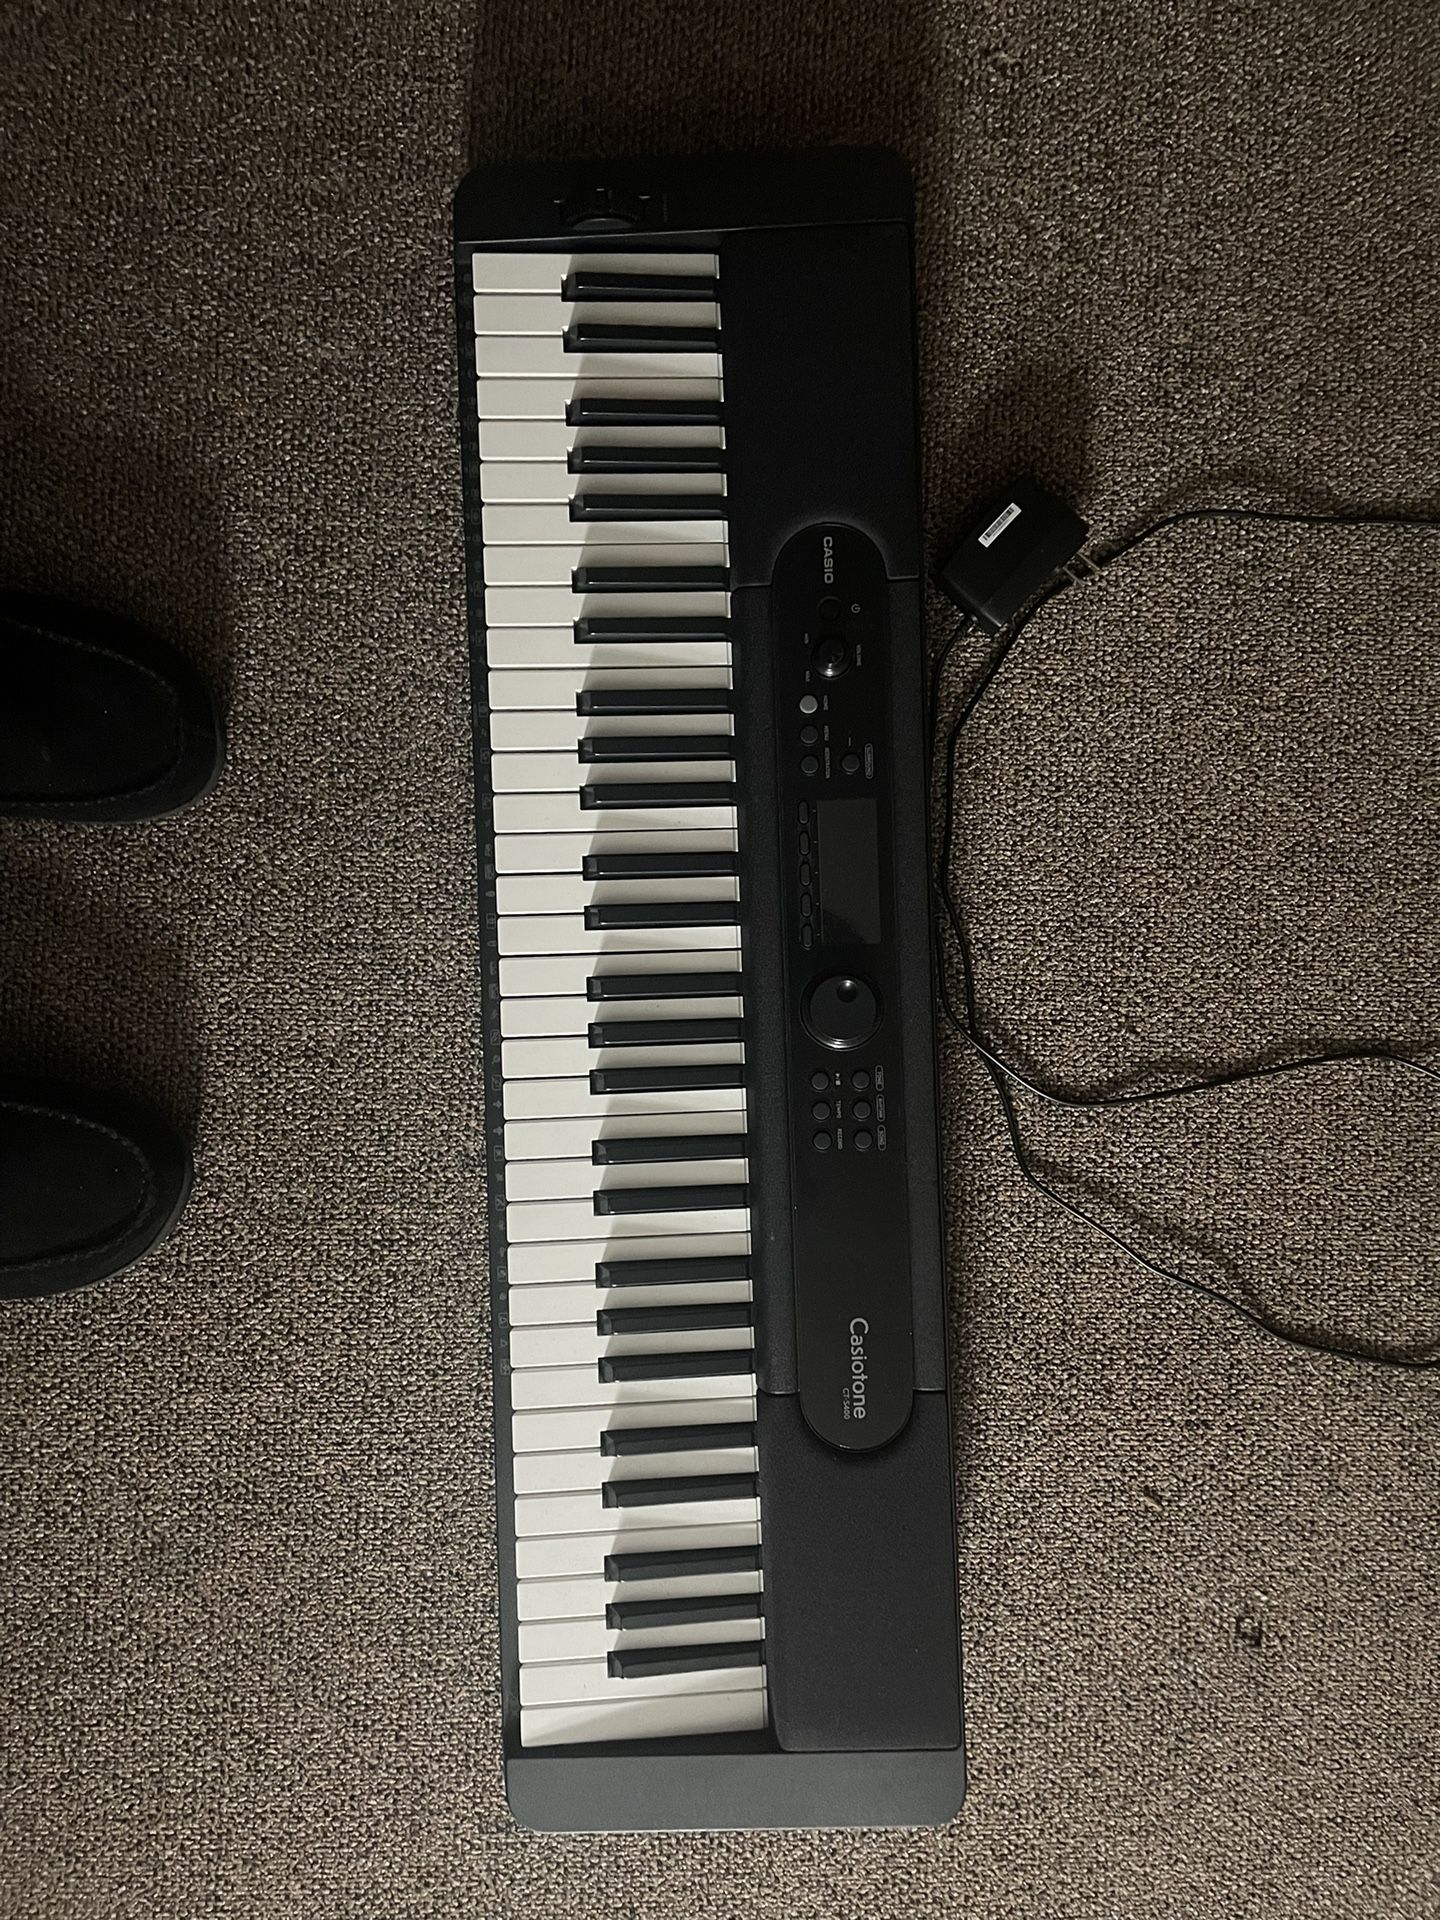 Casio Keyboard “has 500 Instruments To Choose From)